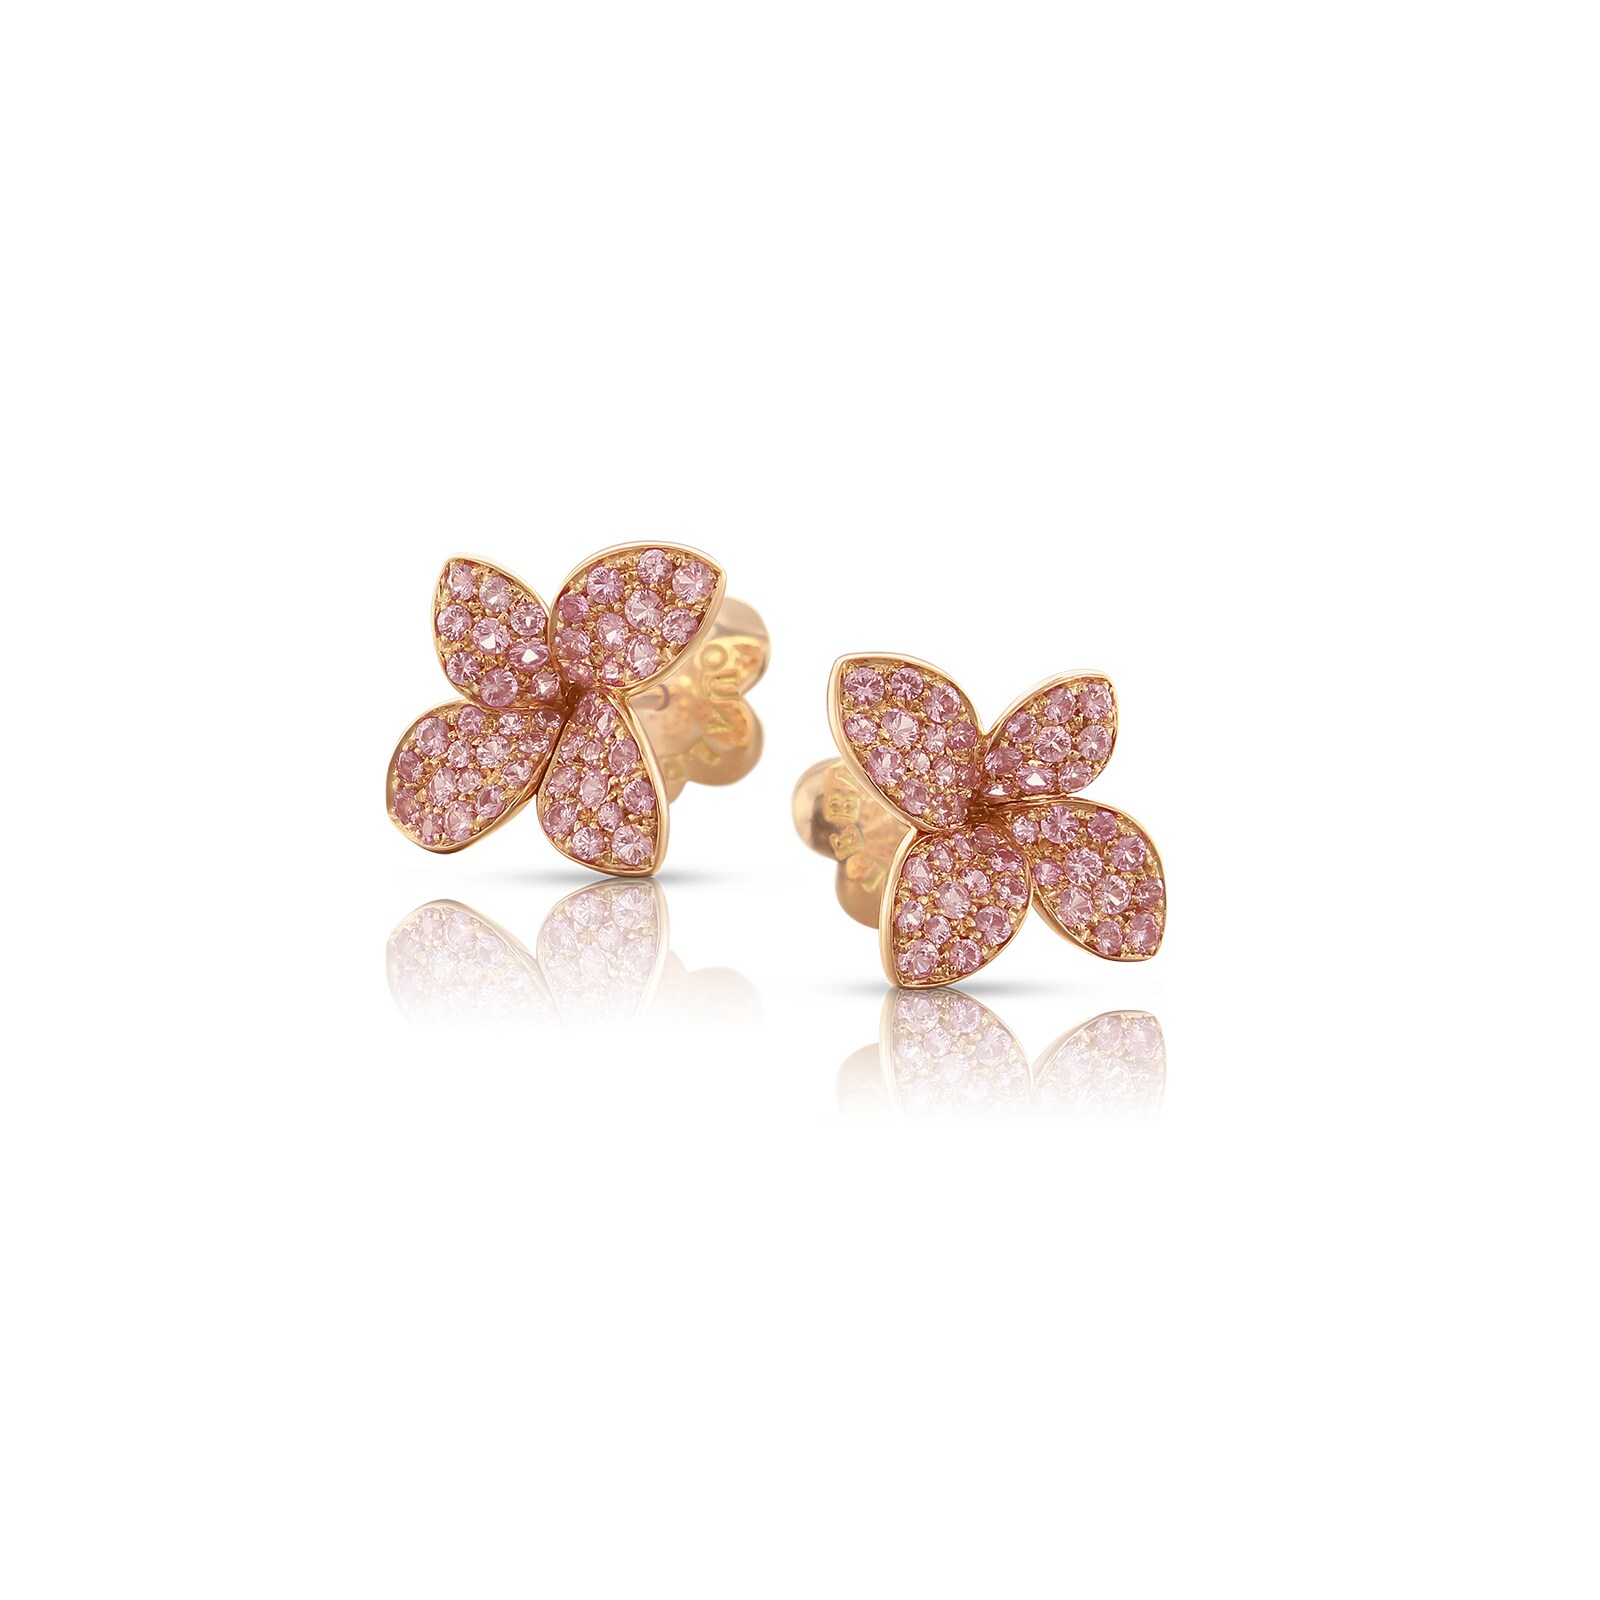 Petit Garden Stud Earrings in 18ct Rose Gold with Pink Sapphires